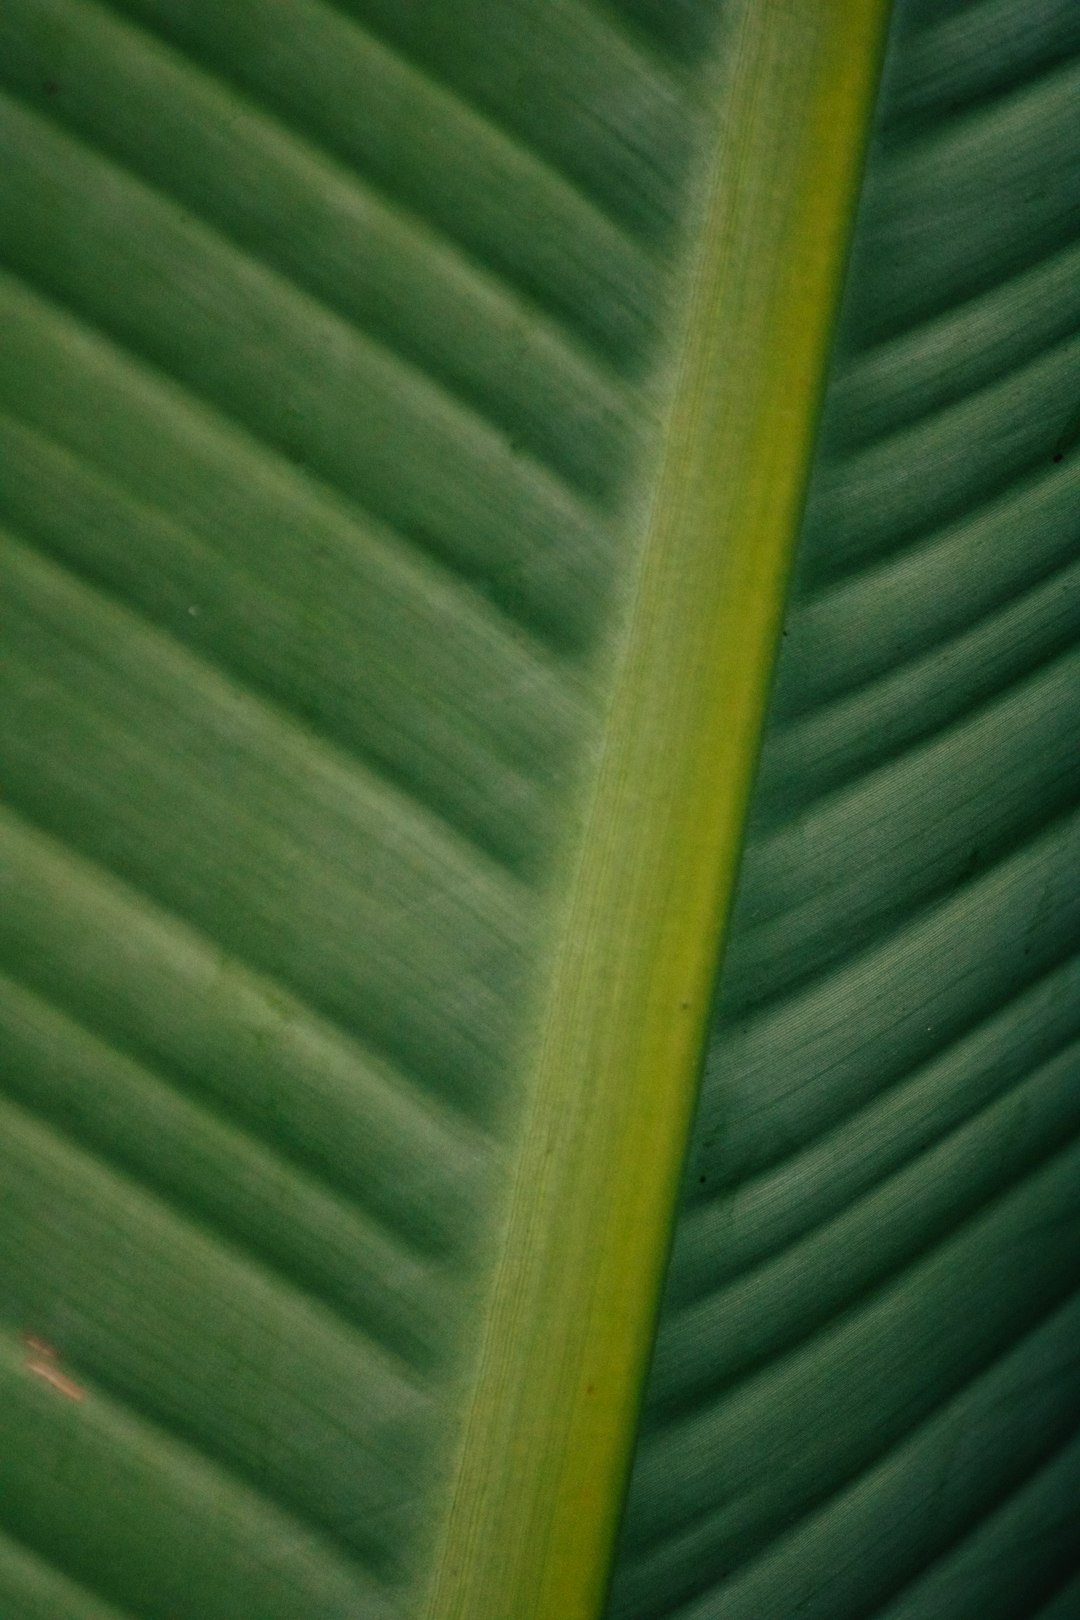 green banana leaf in close up photography